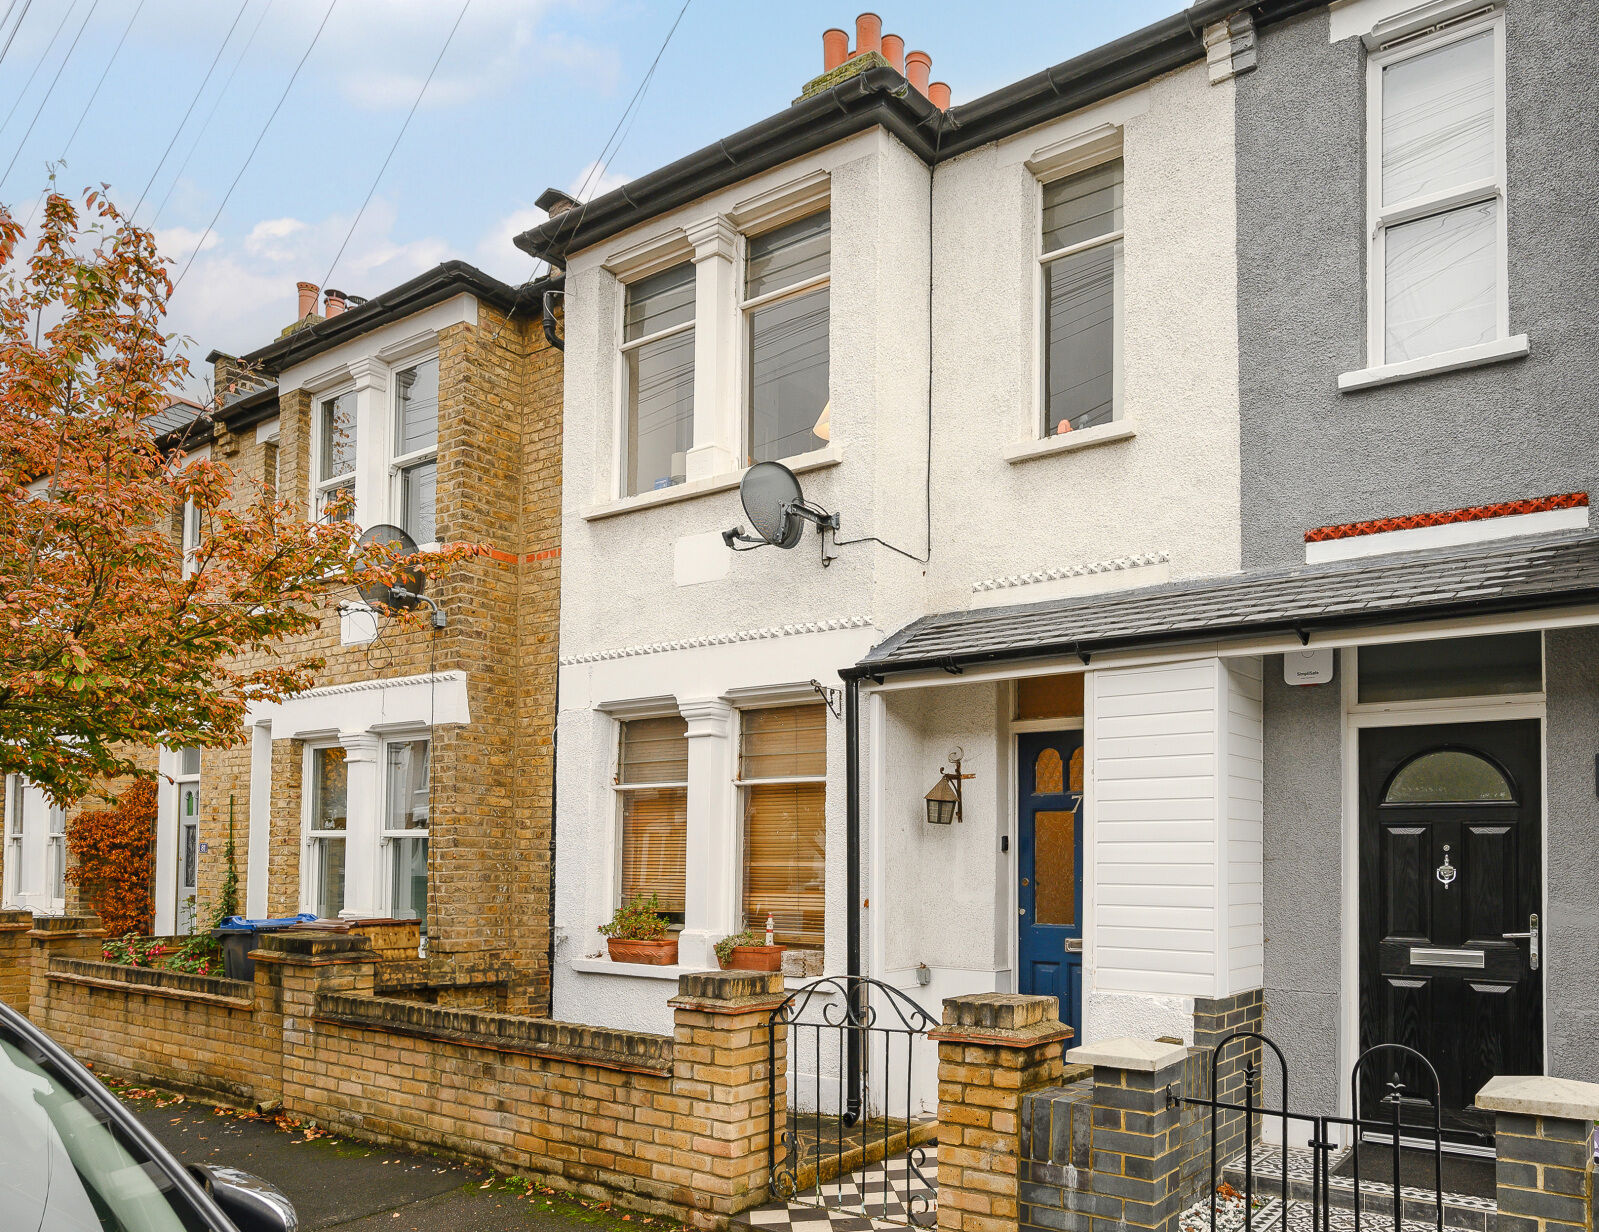 2 bedroom mid terraced house for sale Dorien Road, Raynes Park, SW20, main image